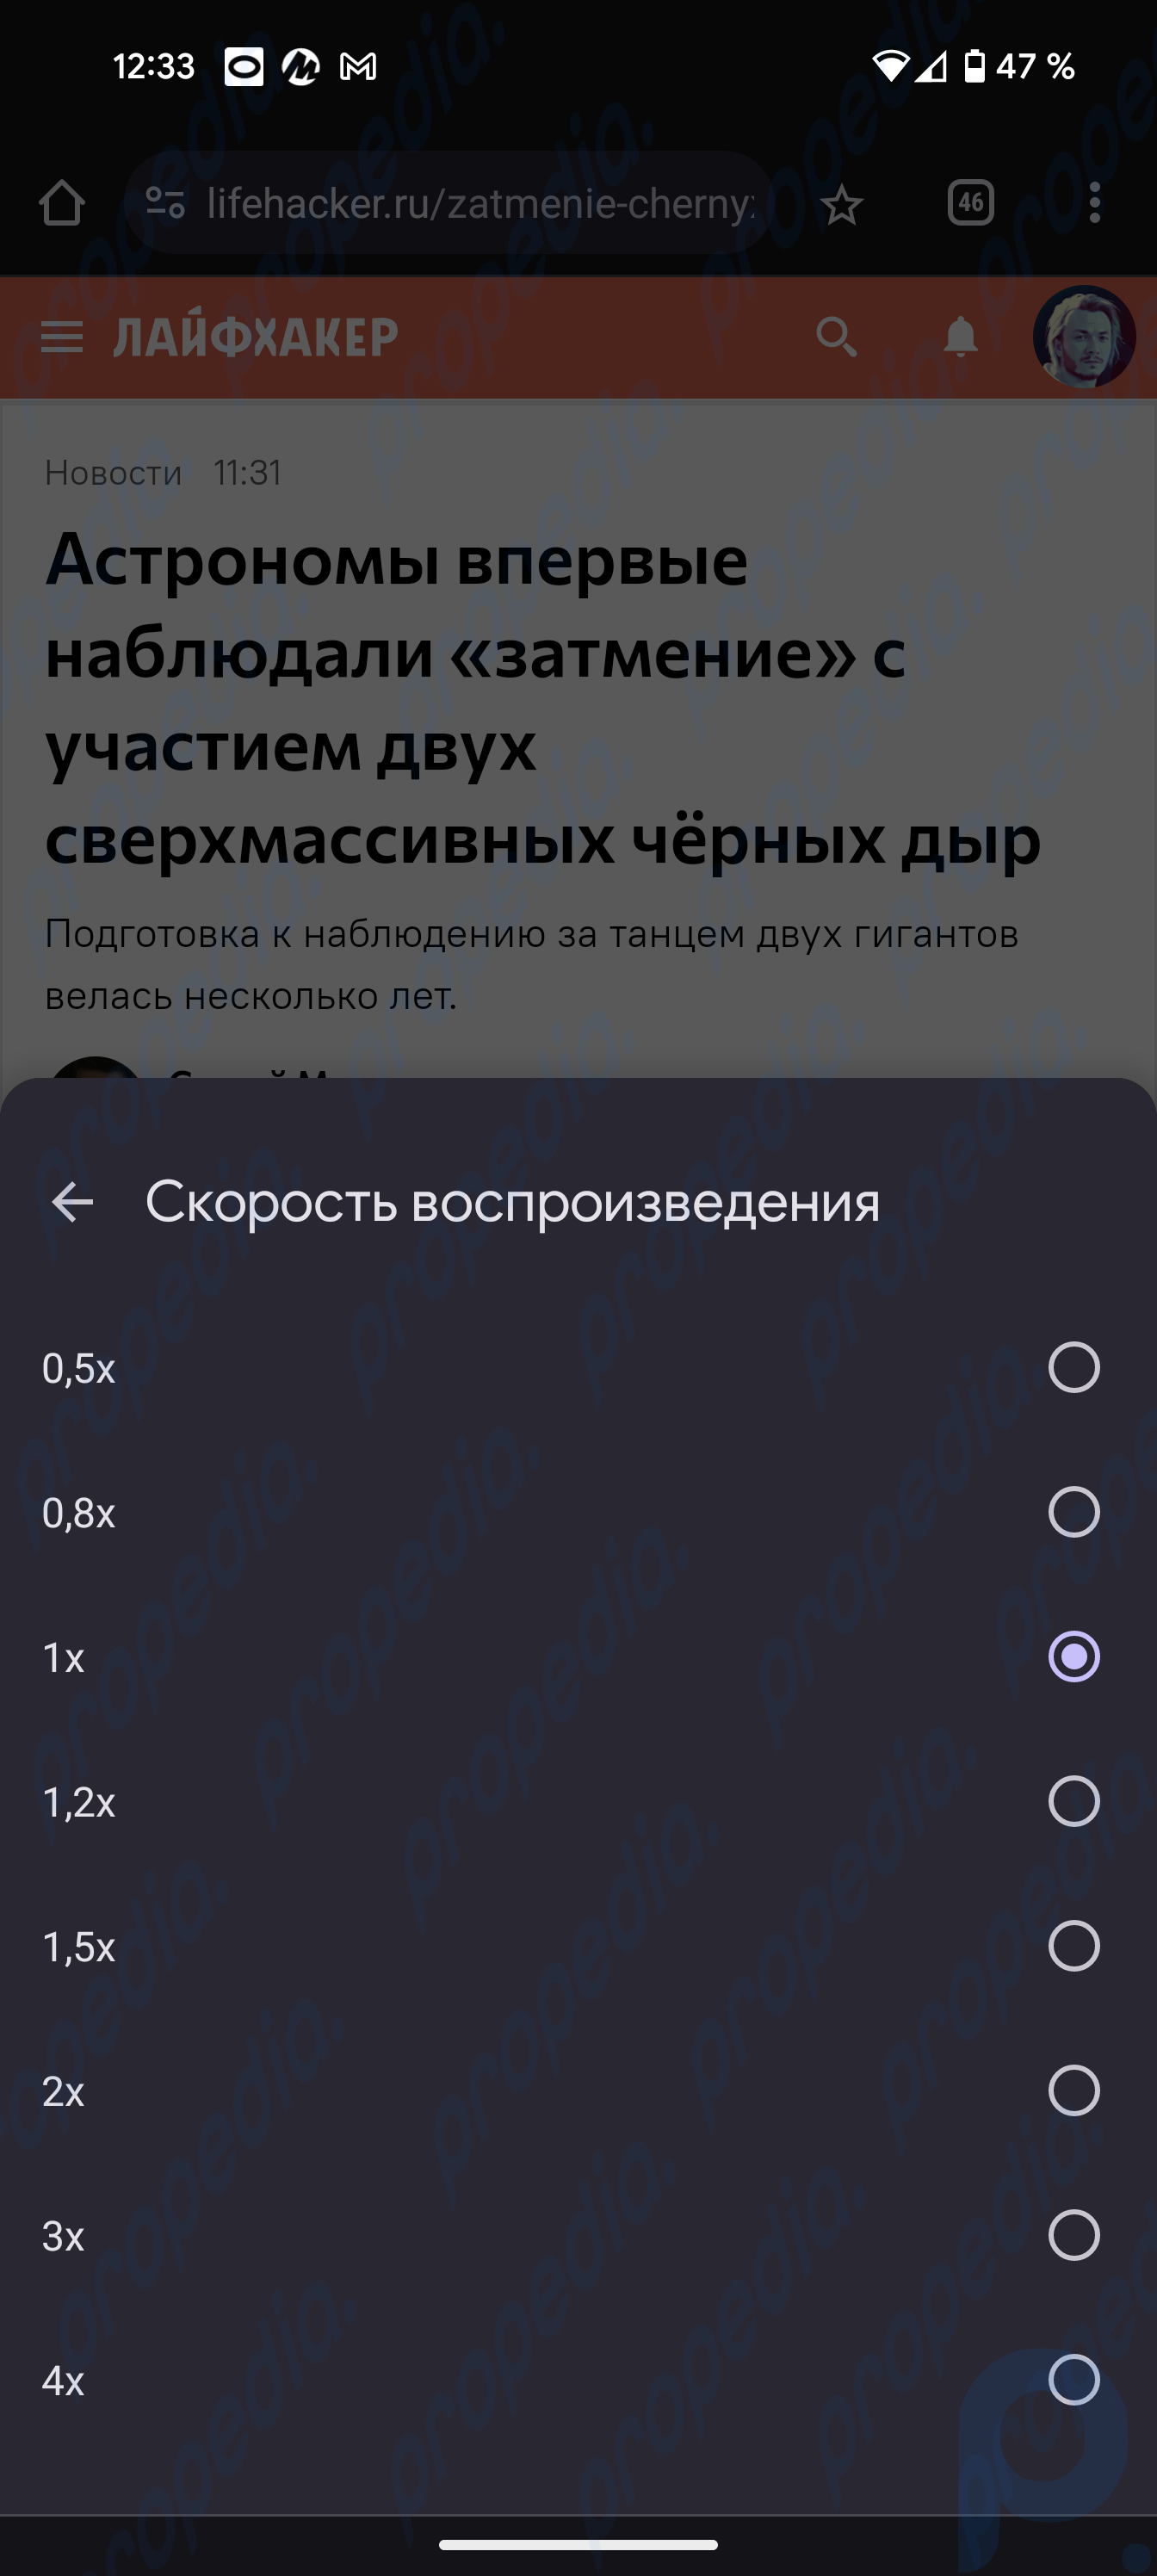 The Chrome browser on Android has learned to read the contents of web pages in Russian